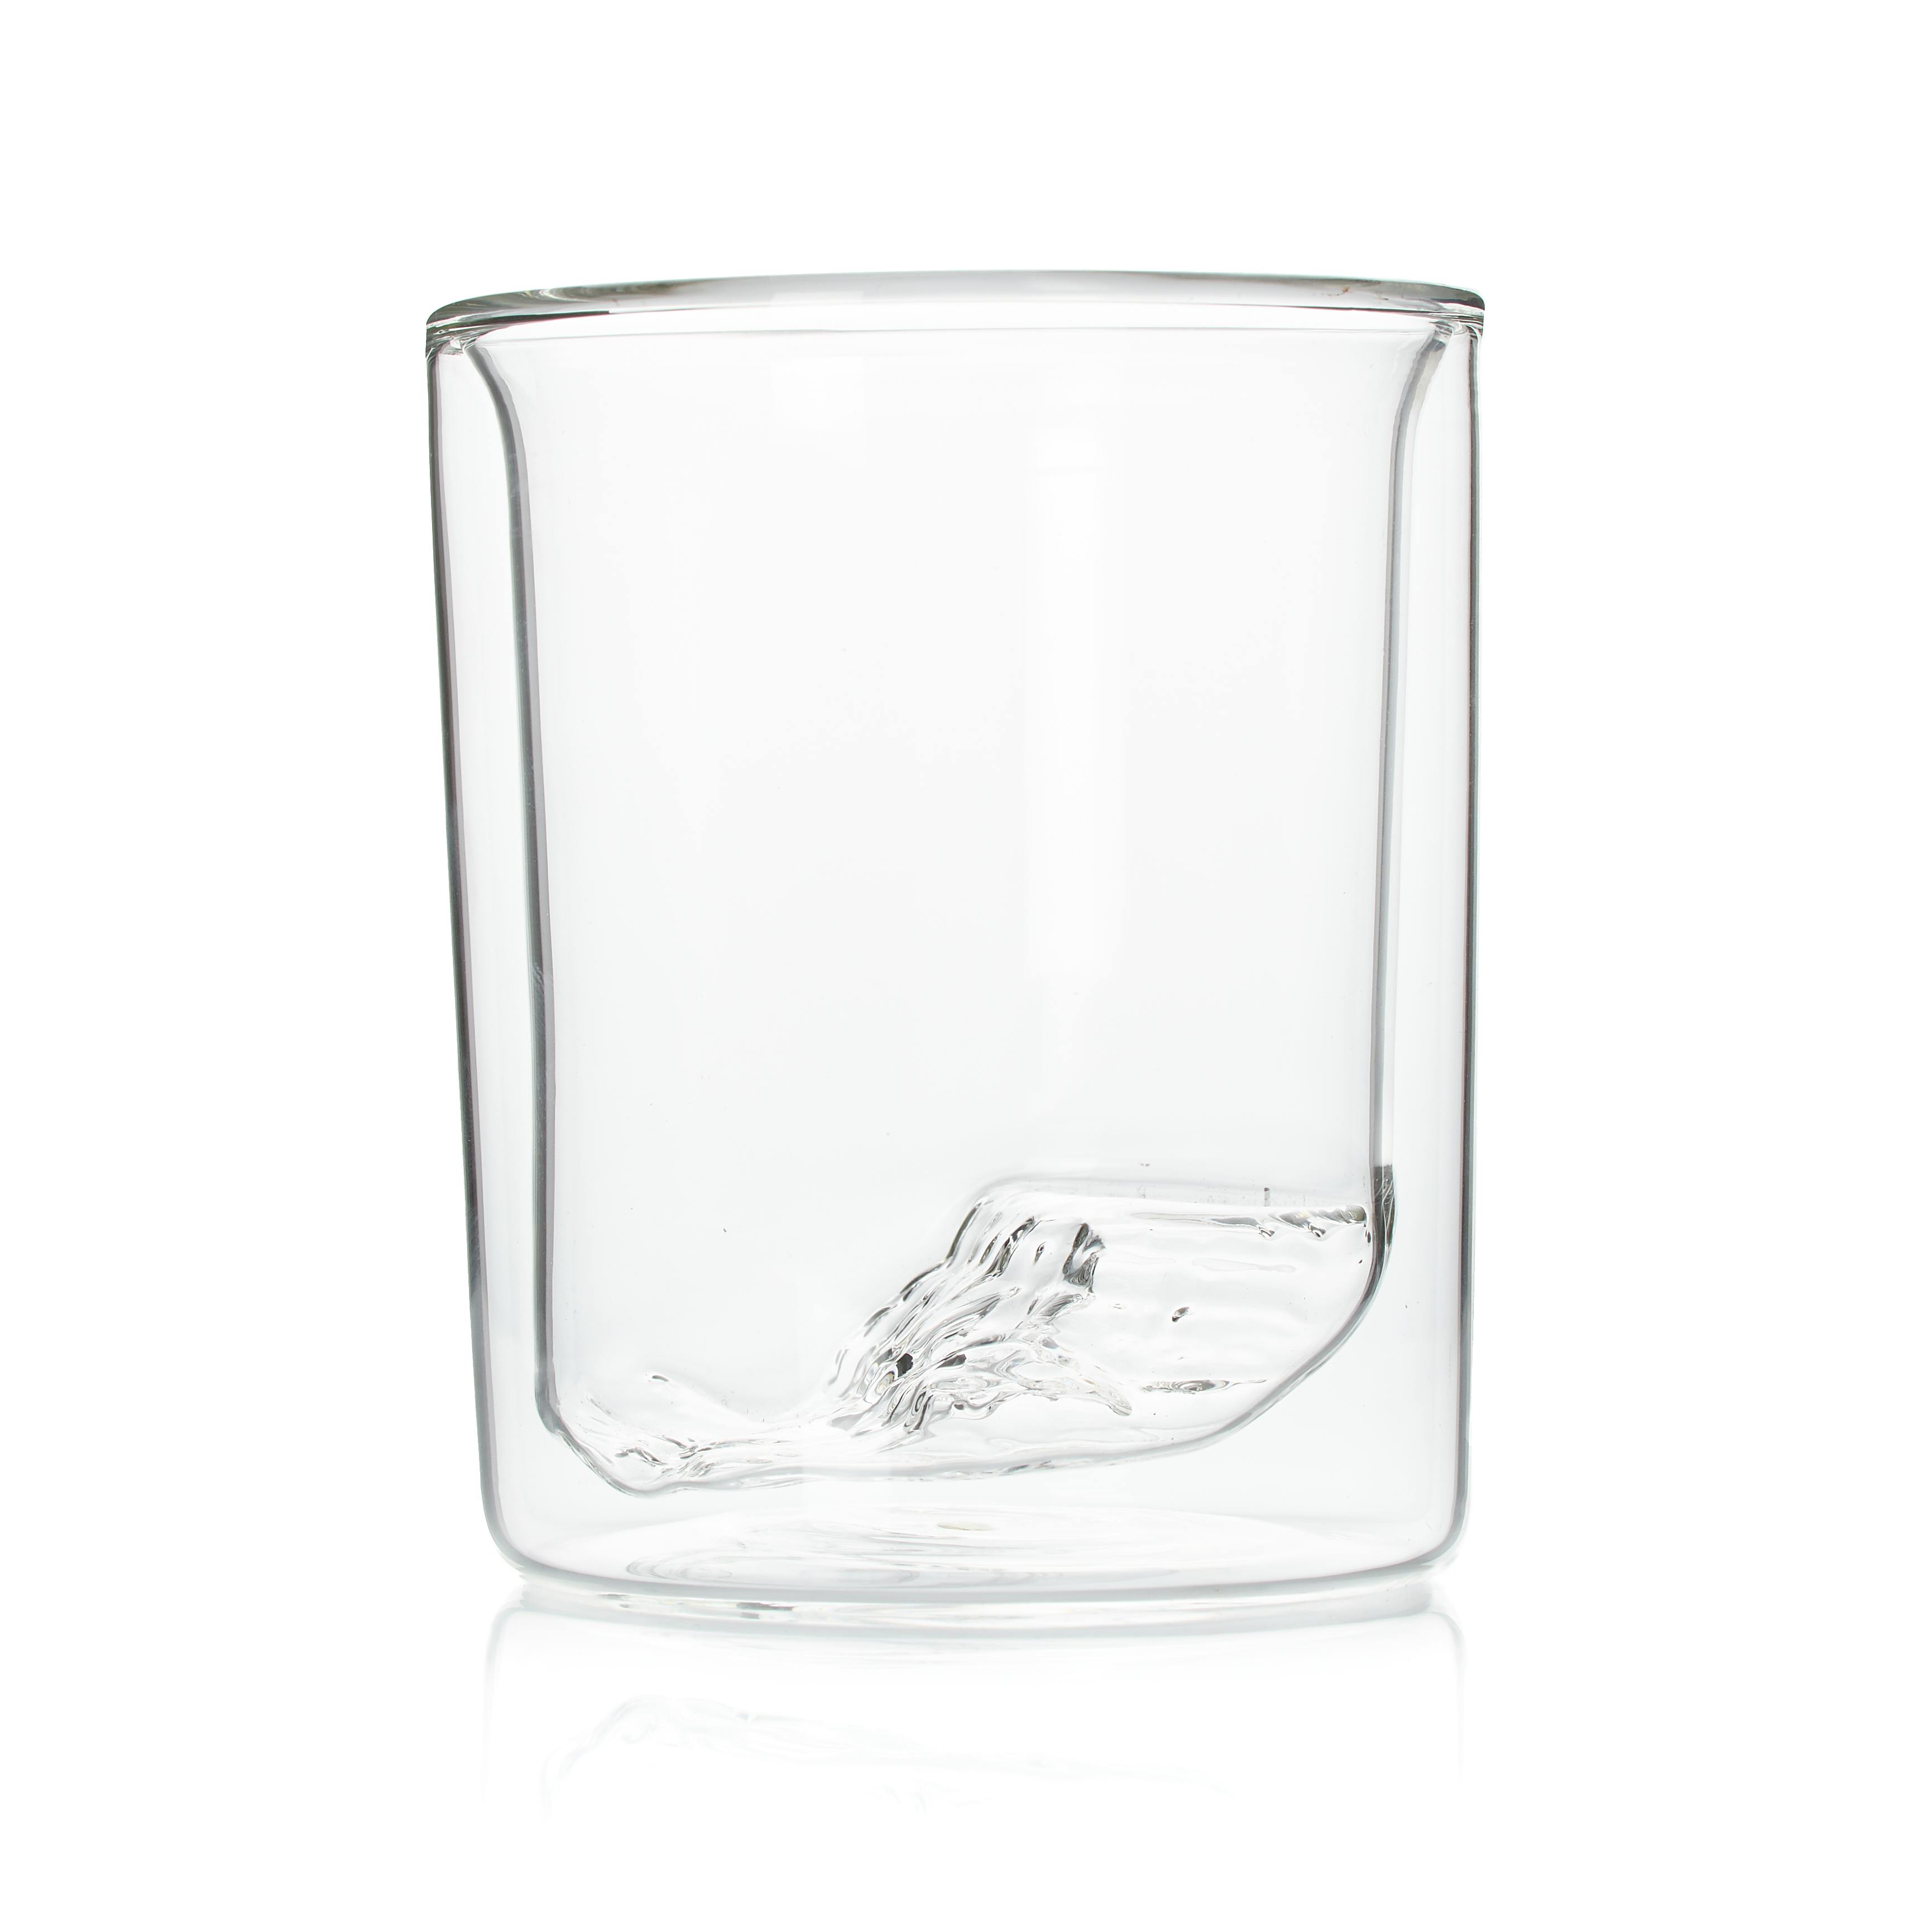 Grand Canyon Whiskey Glass Set of 4 - 300ml – HE Sales and Marketing